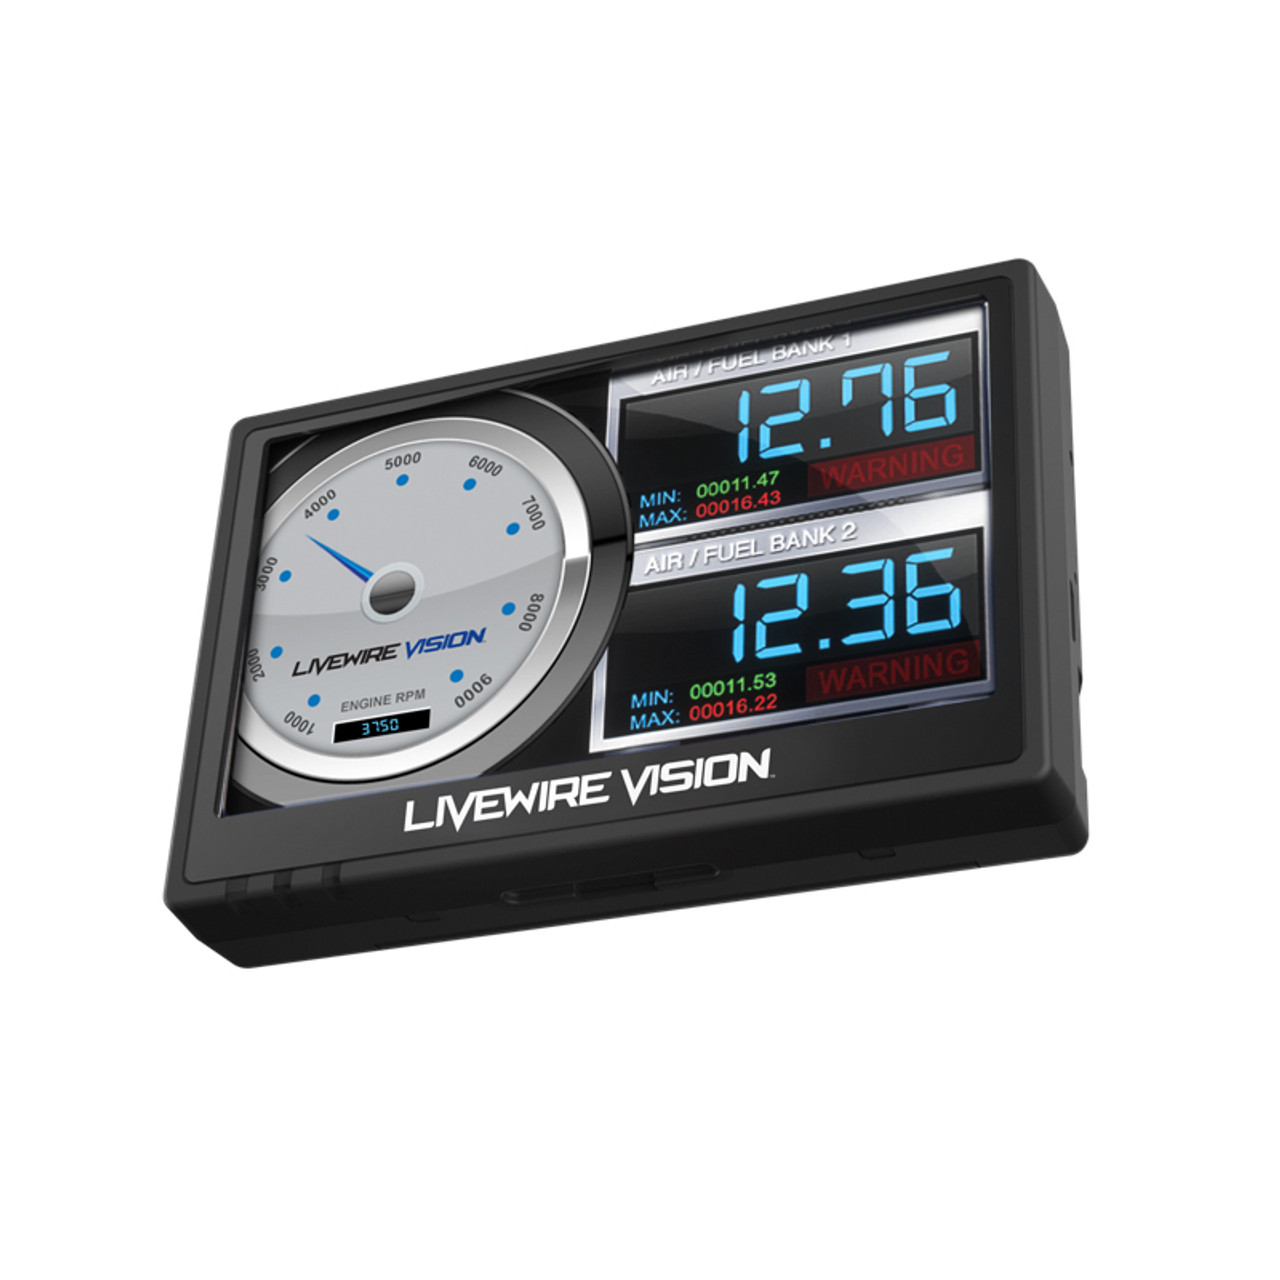 SCT Livewire Vision Perform ance Monitor - SCT5015PWD